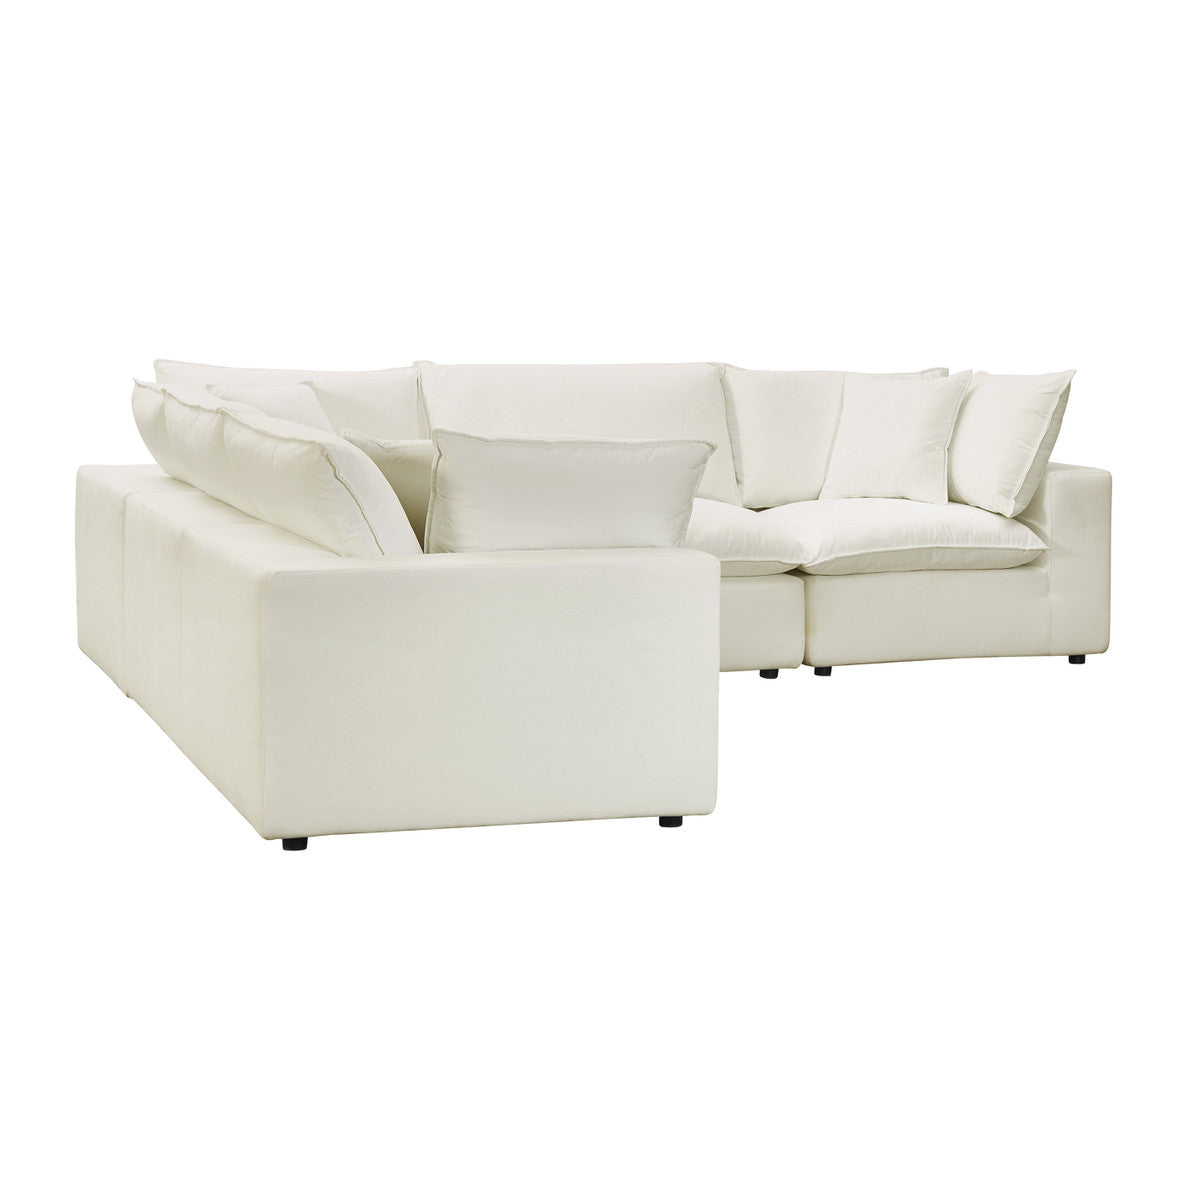 Carlie Natural Modular L-Sectional Sofa - Luxury Living Collection